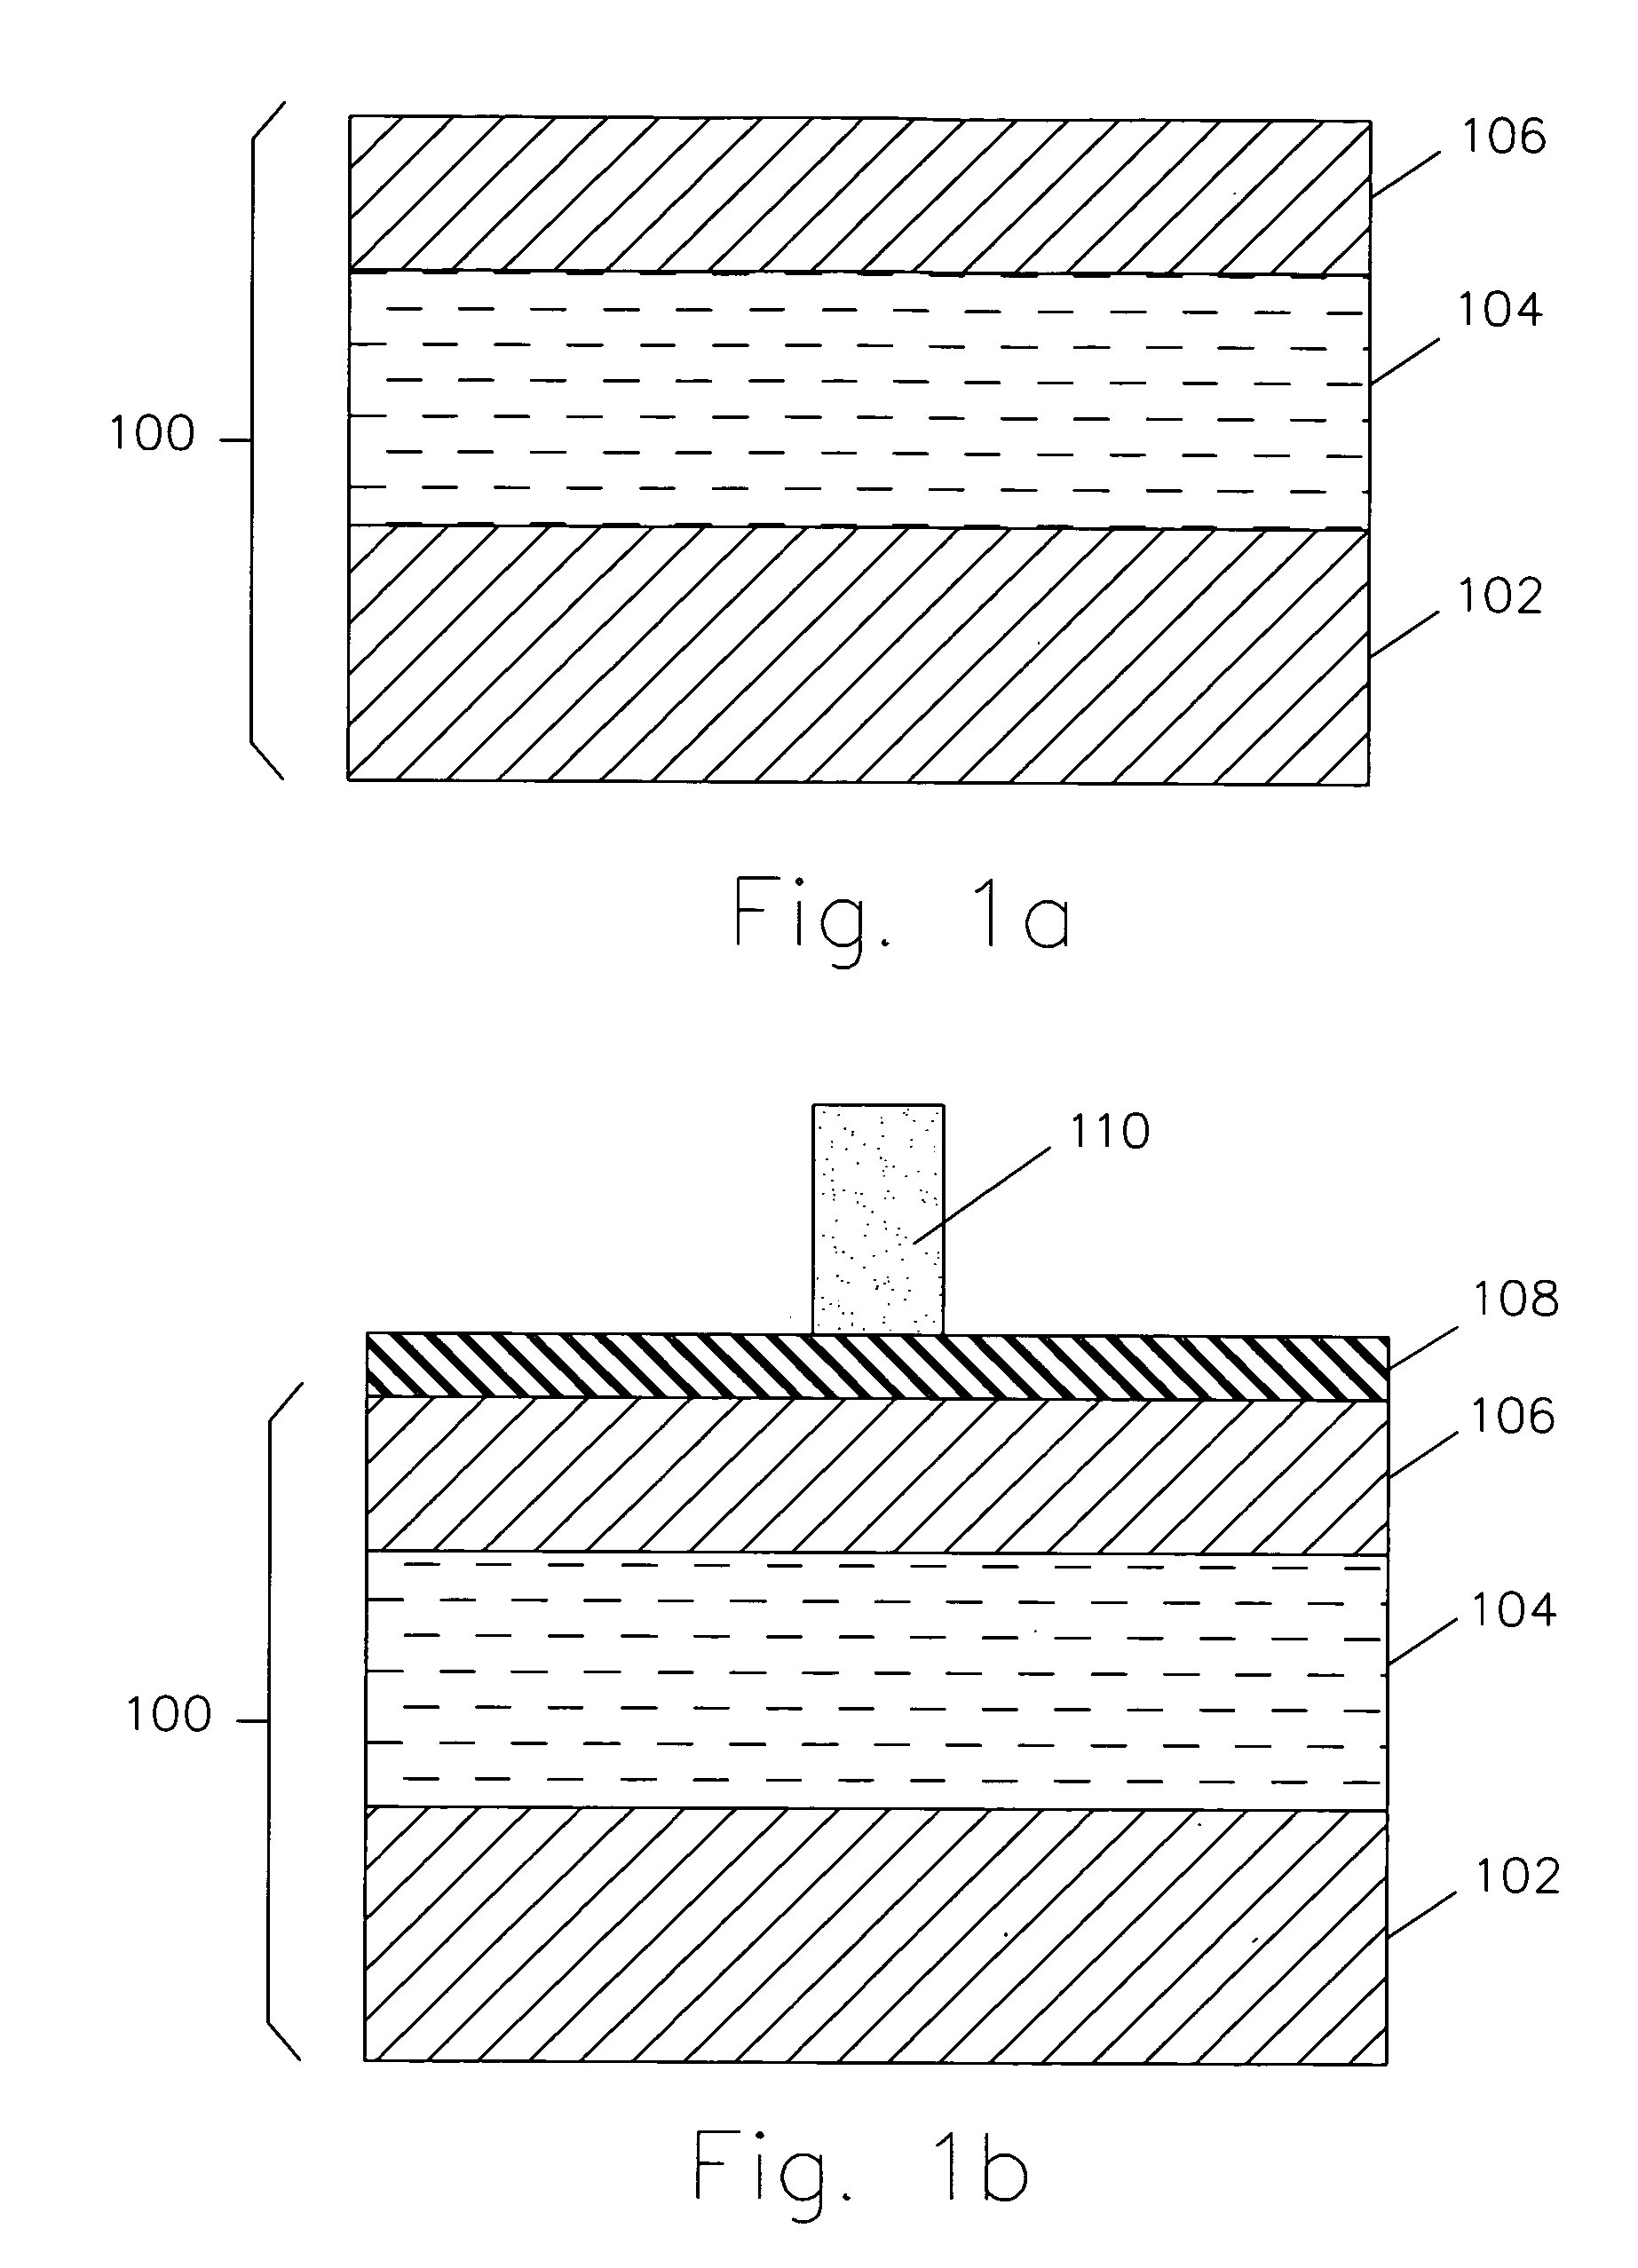 Structure and method to fabricate FinFET devices